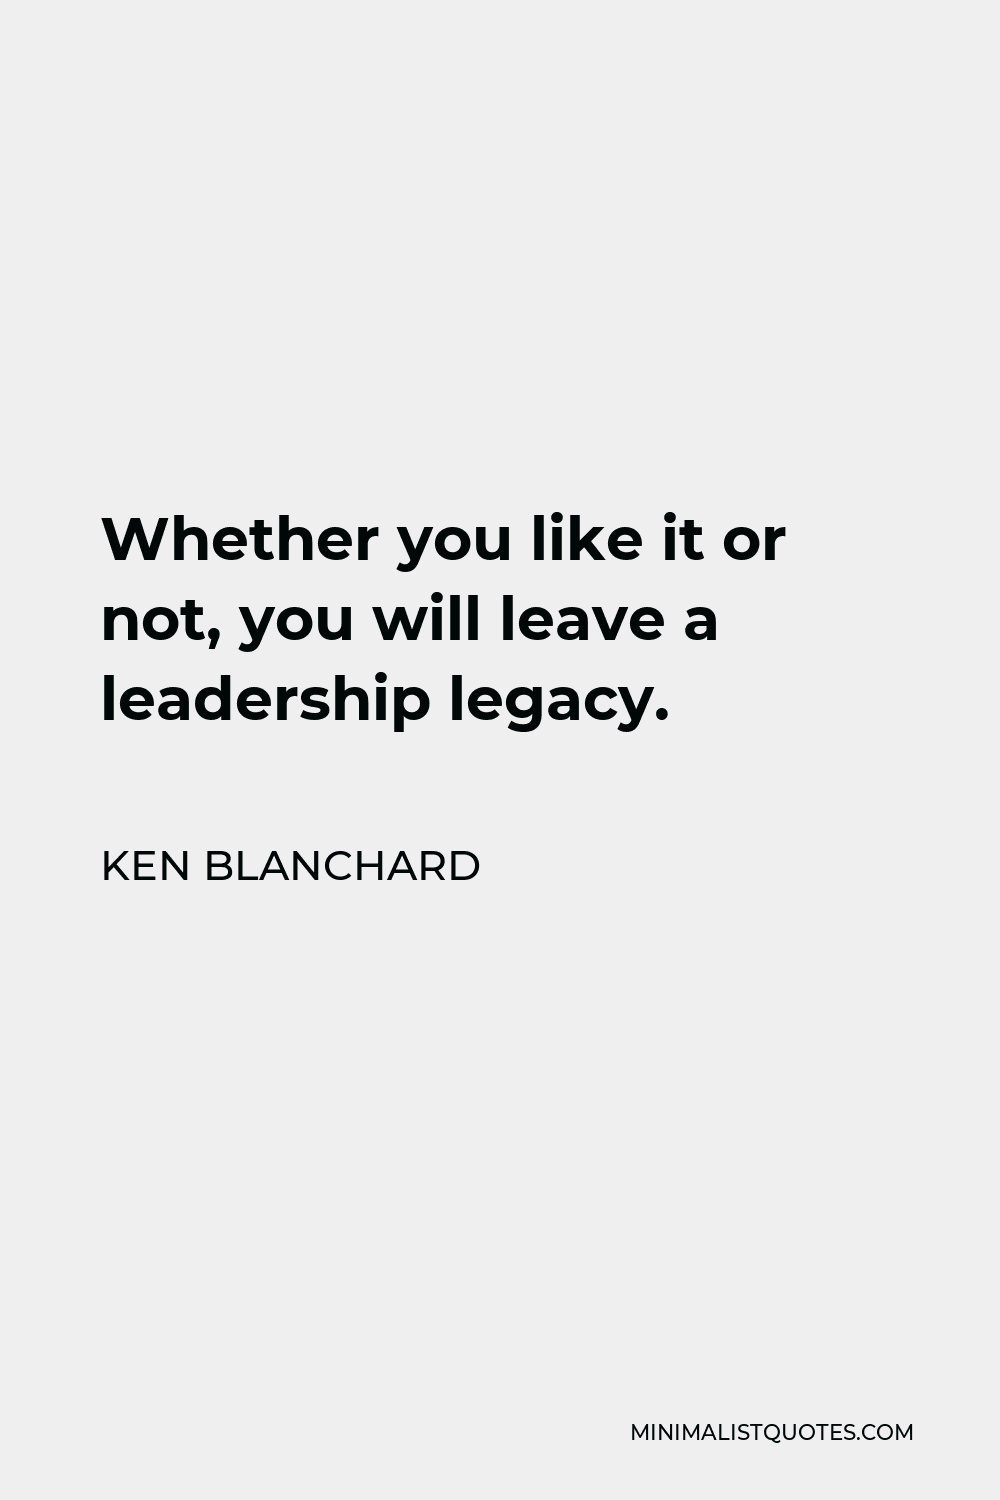 Ken Blanchard Quote - Whether you like it or not, you will leave a leadership legacy.